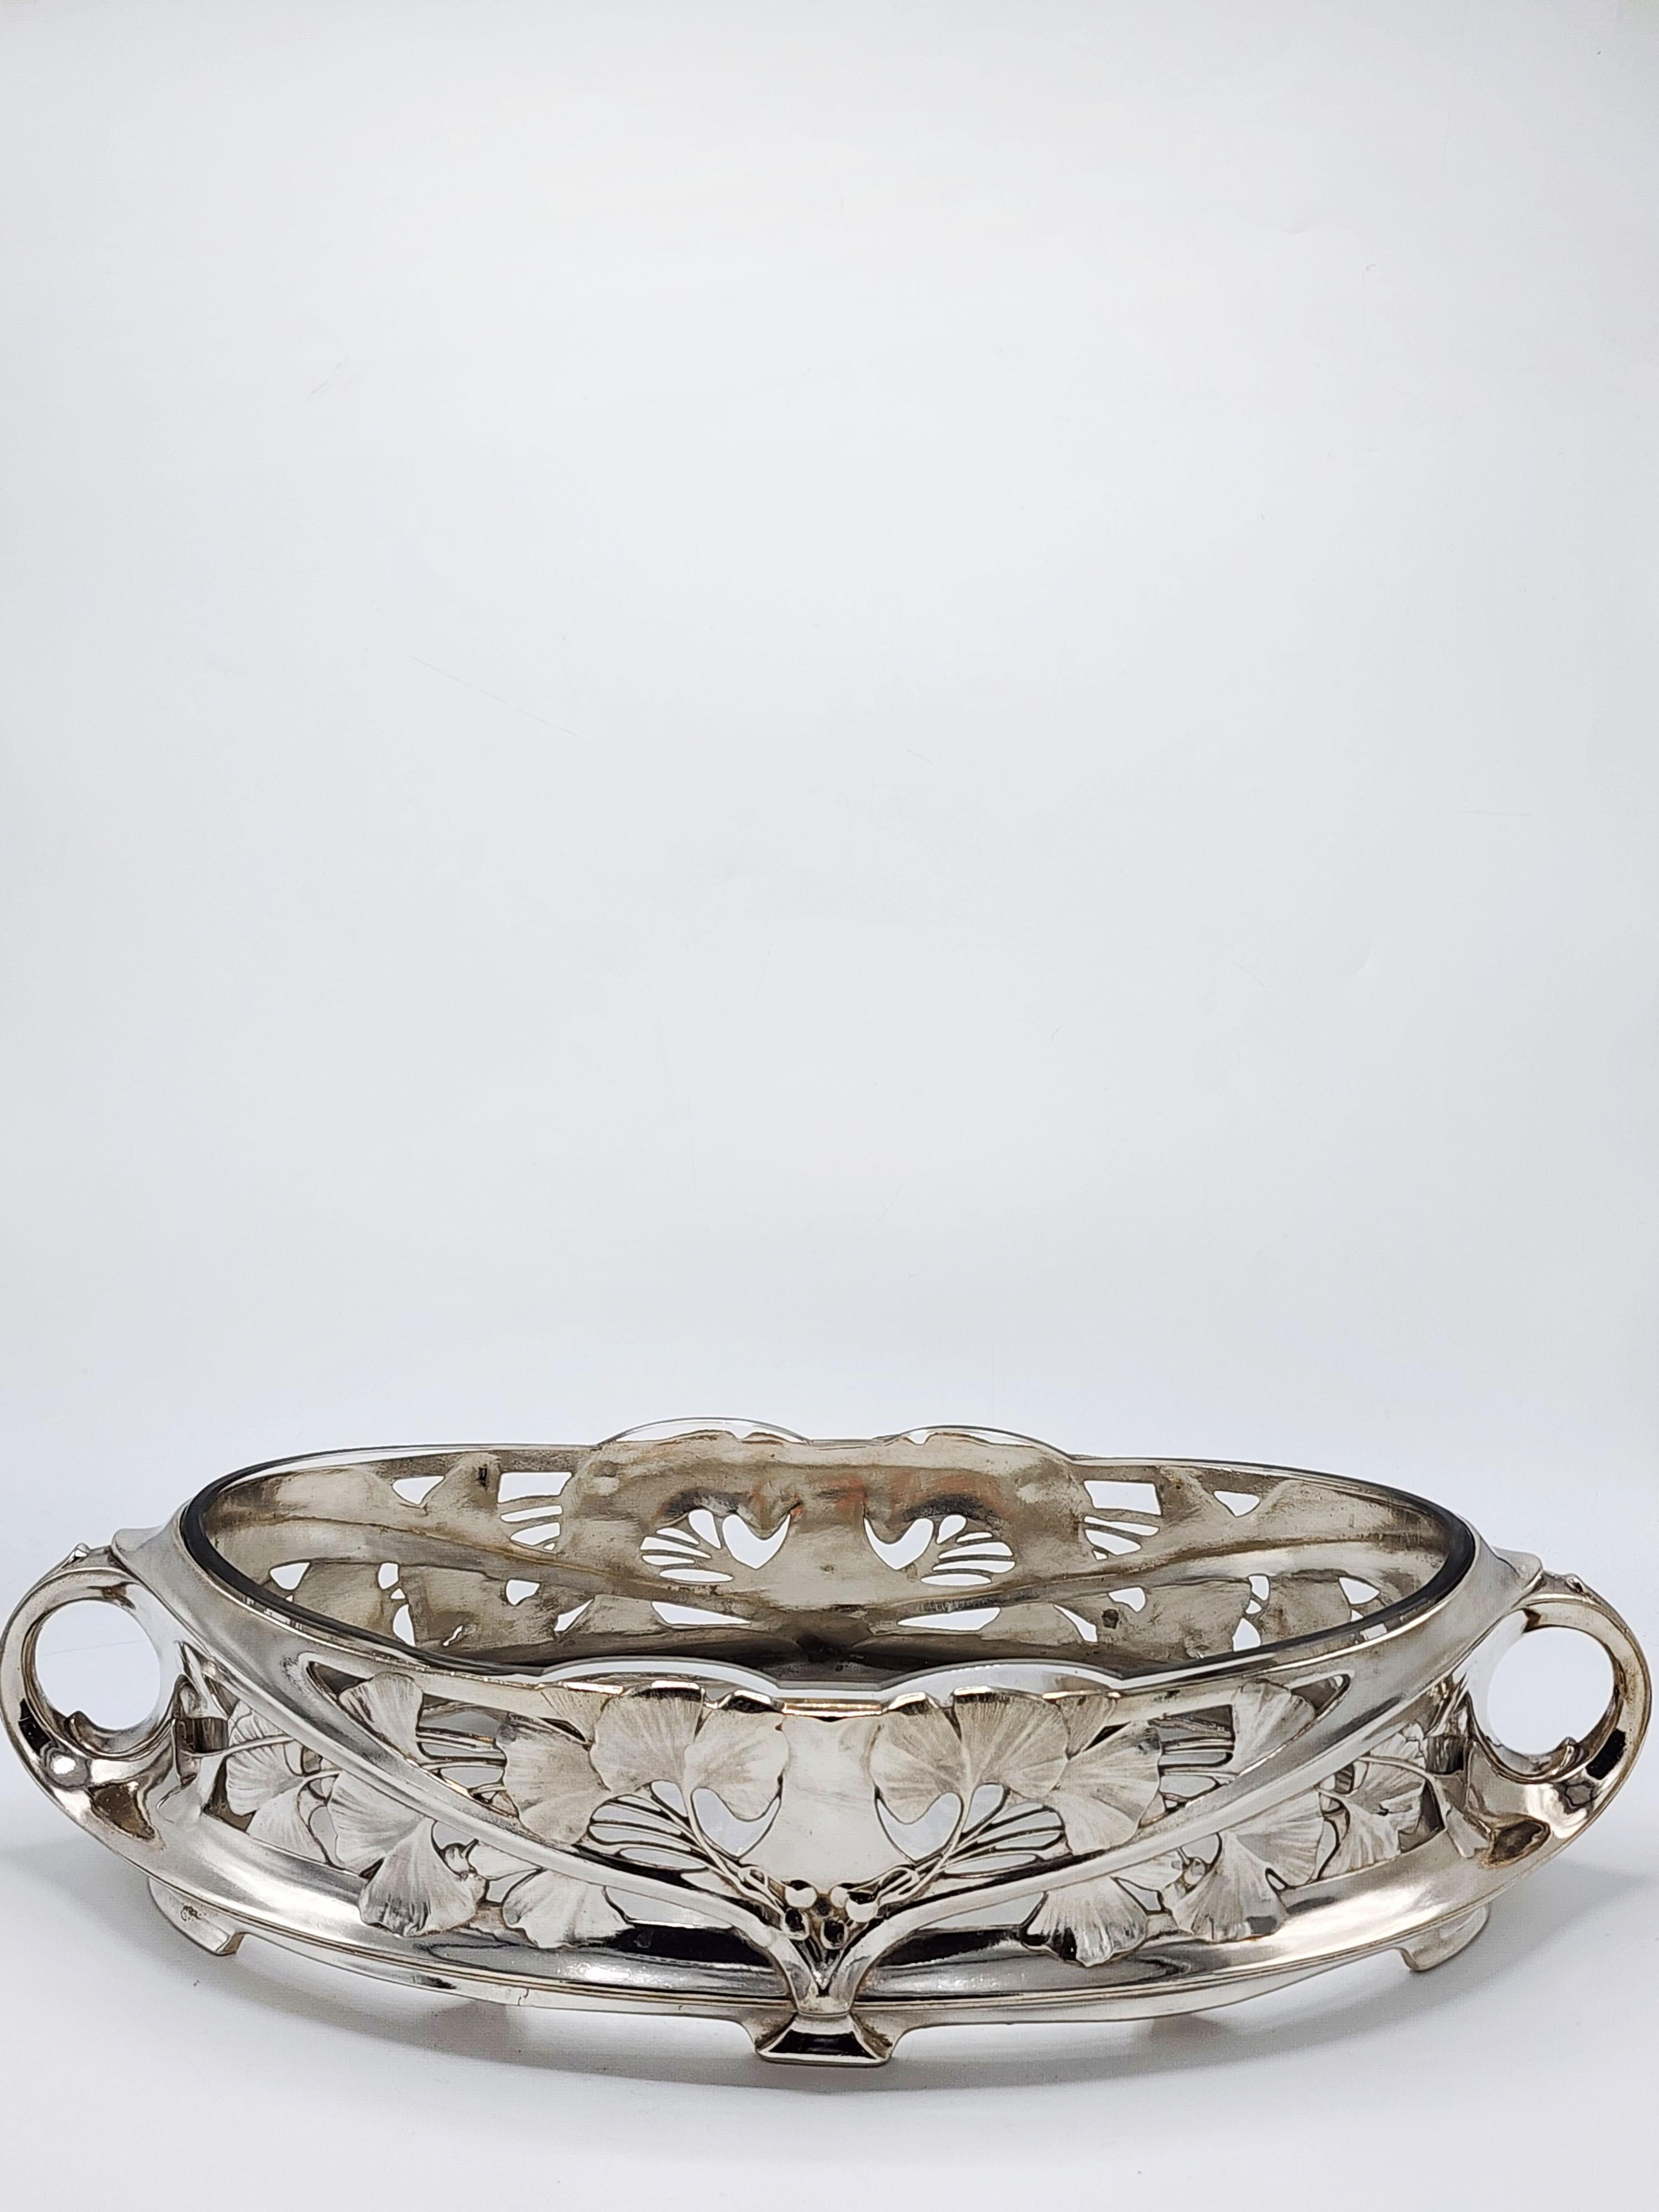 Gallia table centerpiece, Art Nouveau style in silver metal
Art Nouveau style centerpiece in silver metal with intricate details and a Ginkgo biloba leaf floral design. The edges are wavy adding a touch of elegance to the overall design. Work of the